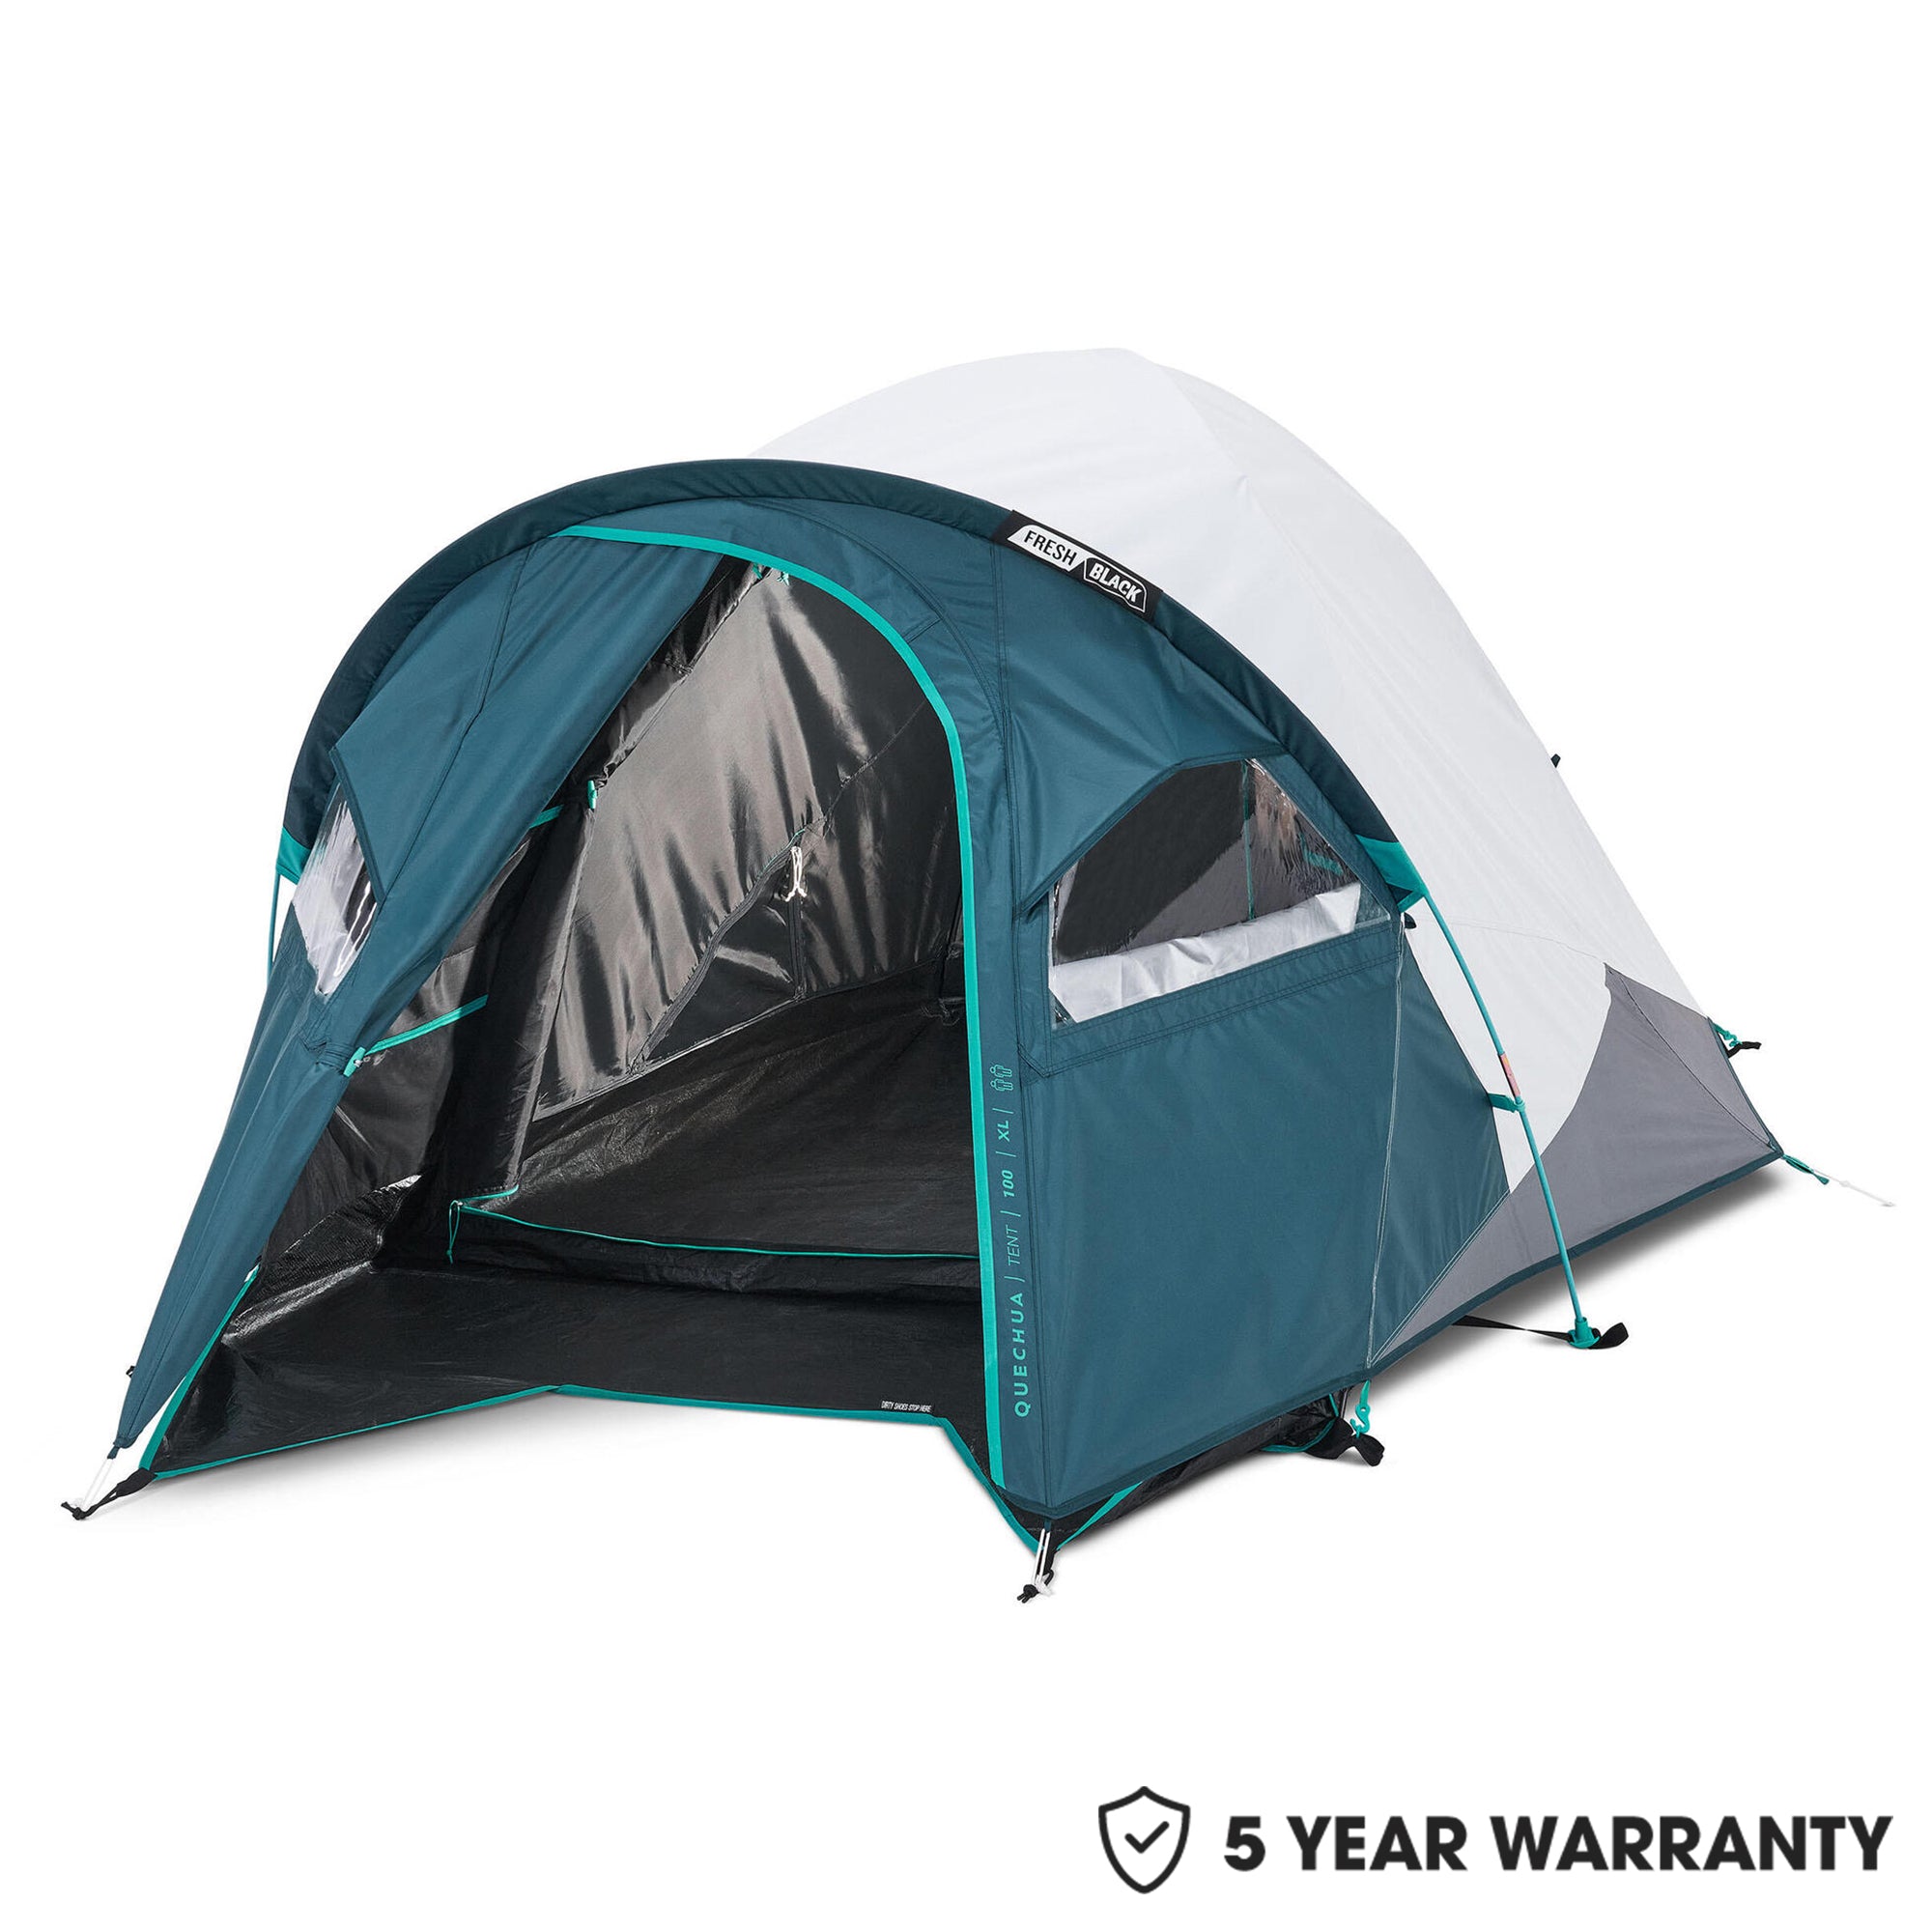 uitslag Analist passie Camping Tents (2-3 Person) | Decathlon